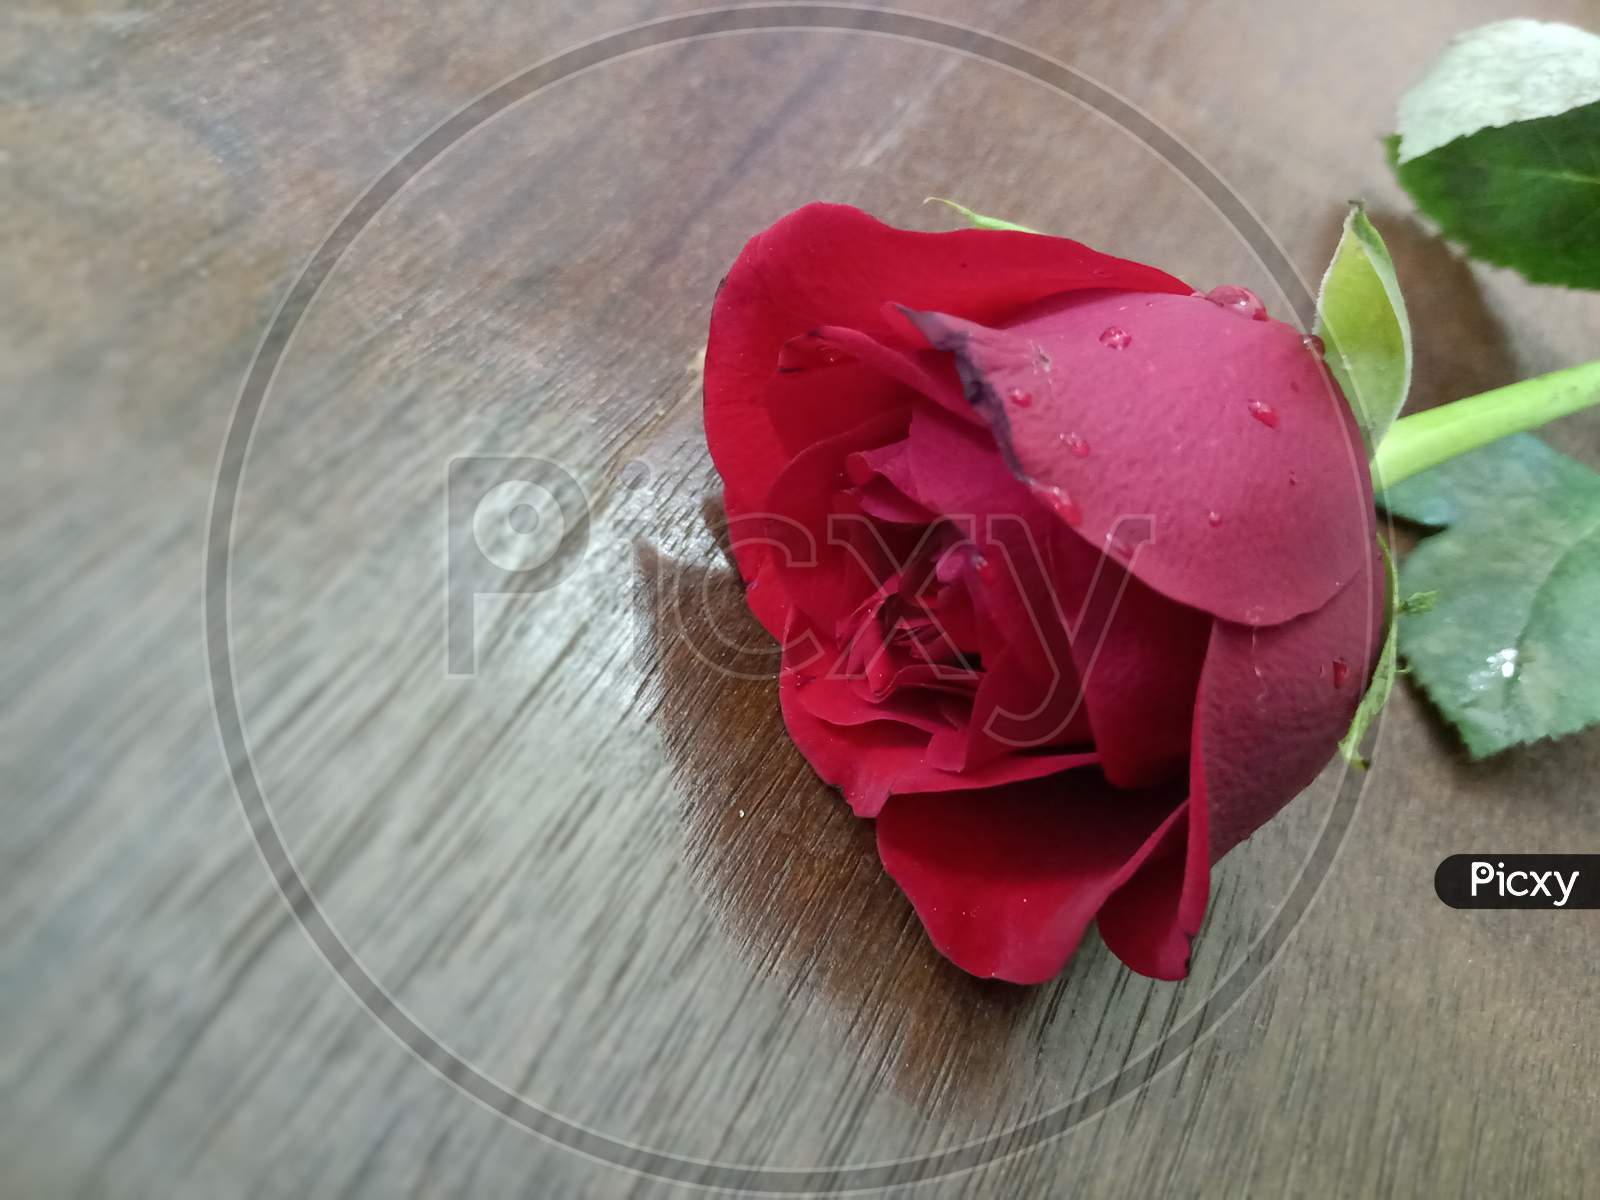 Red Rose on the wooden table